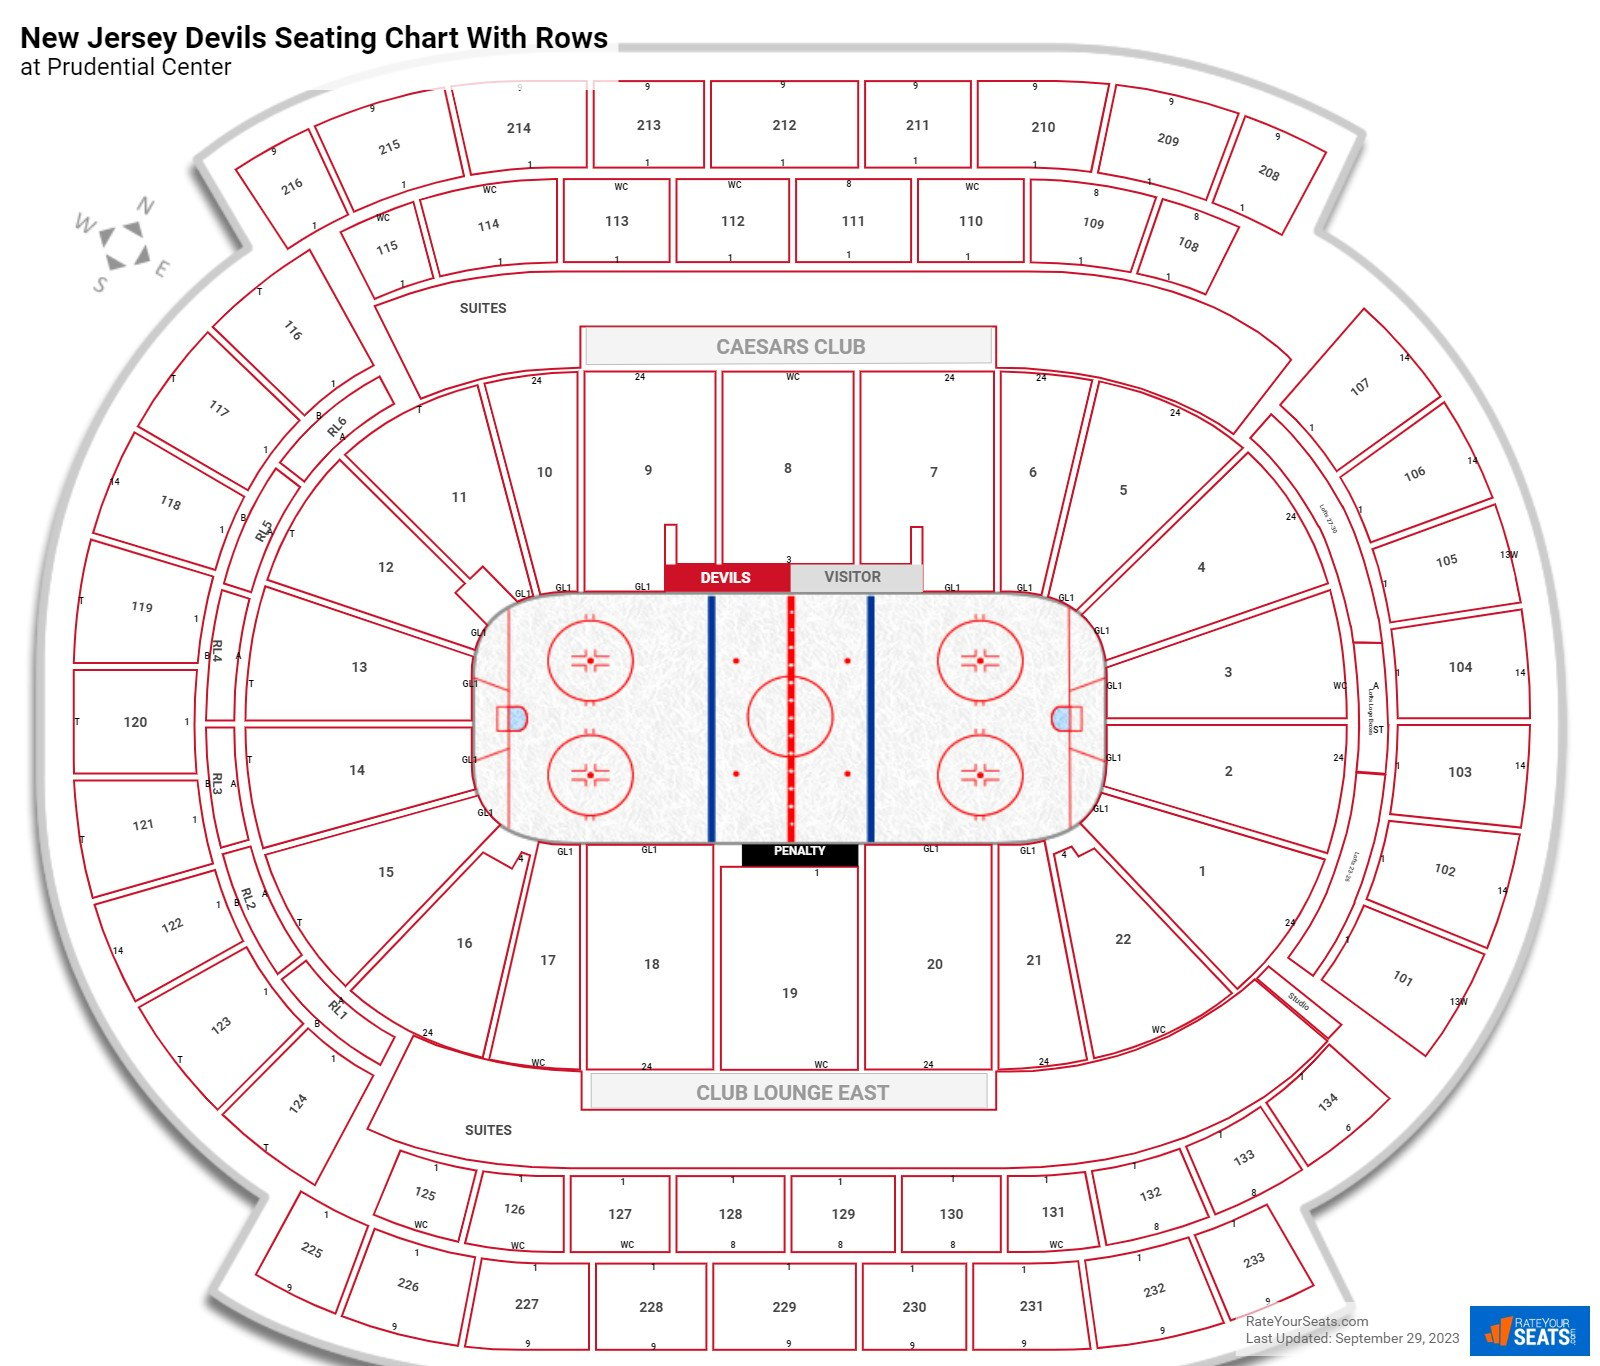 Prudential Center seating chart with row numbers